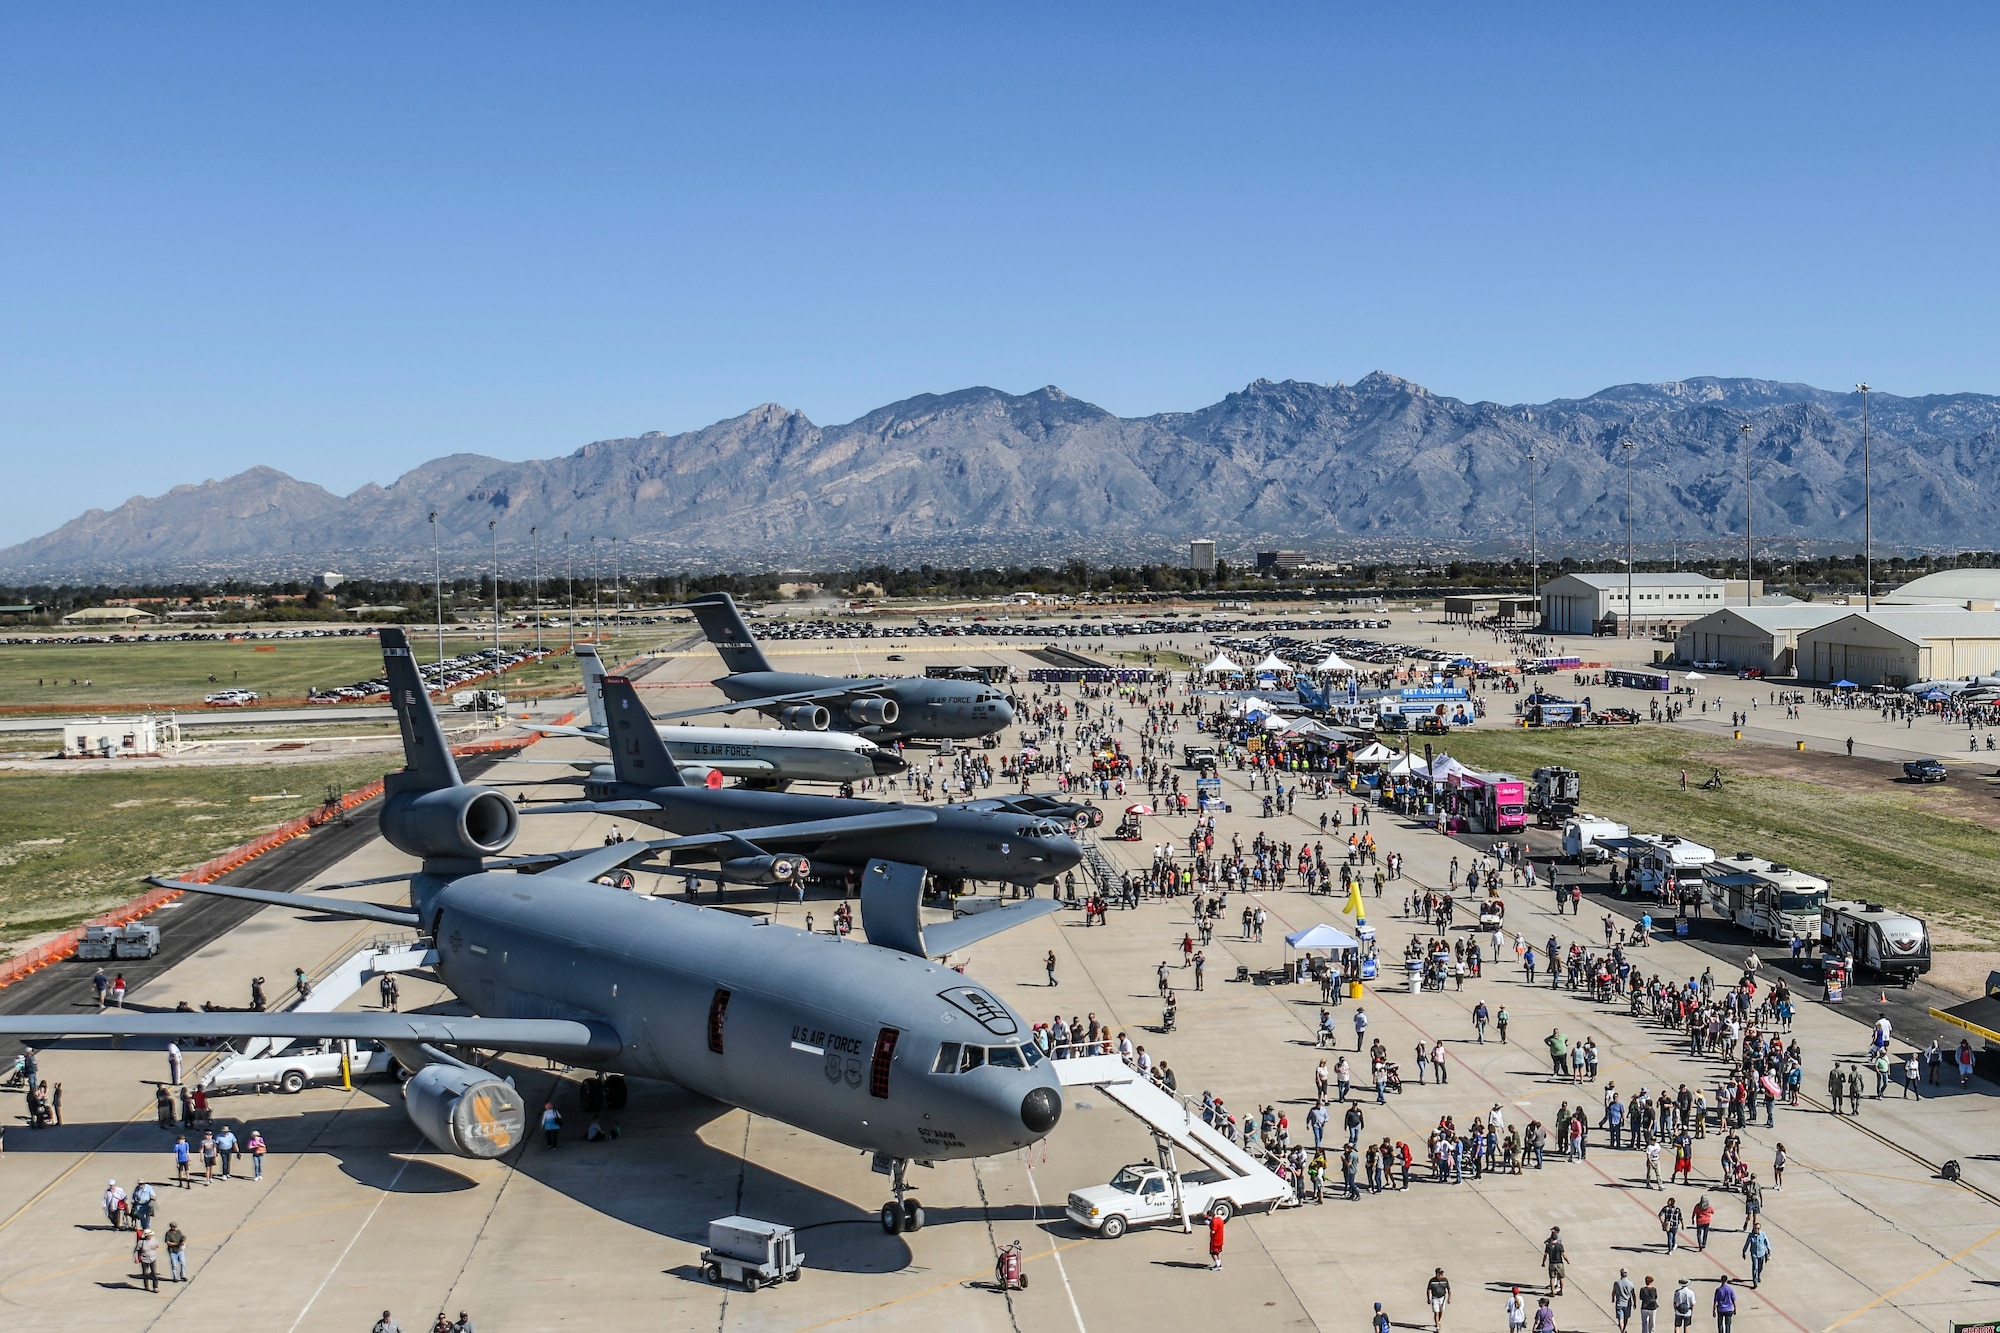 aircraft are displayed on the flight line during an air show surrounded by attendees.